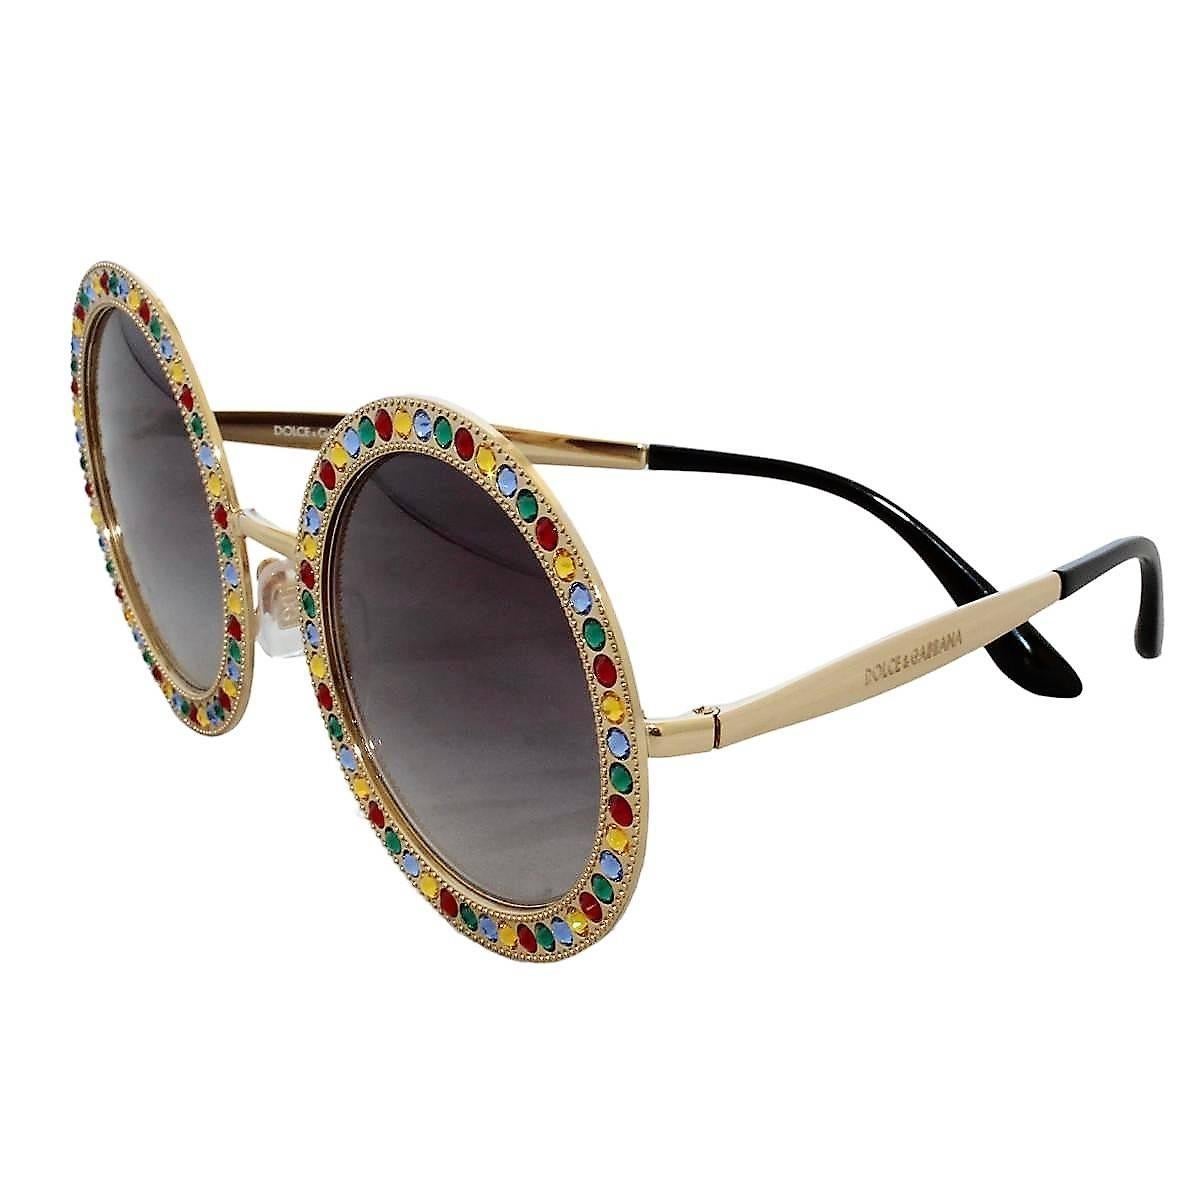 Fantastic and glamour pair of Dolce & Gabbana sunglasses
DG 2170 B Mambo
Golden metal frames
Round dark lenses
Multicolored swarovsky crystals
14 Cm width
Brand new with case and box
Made in Italy
